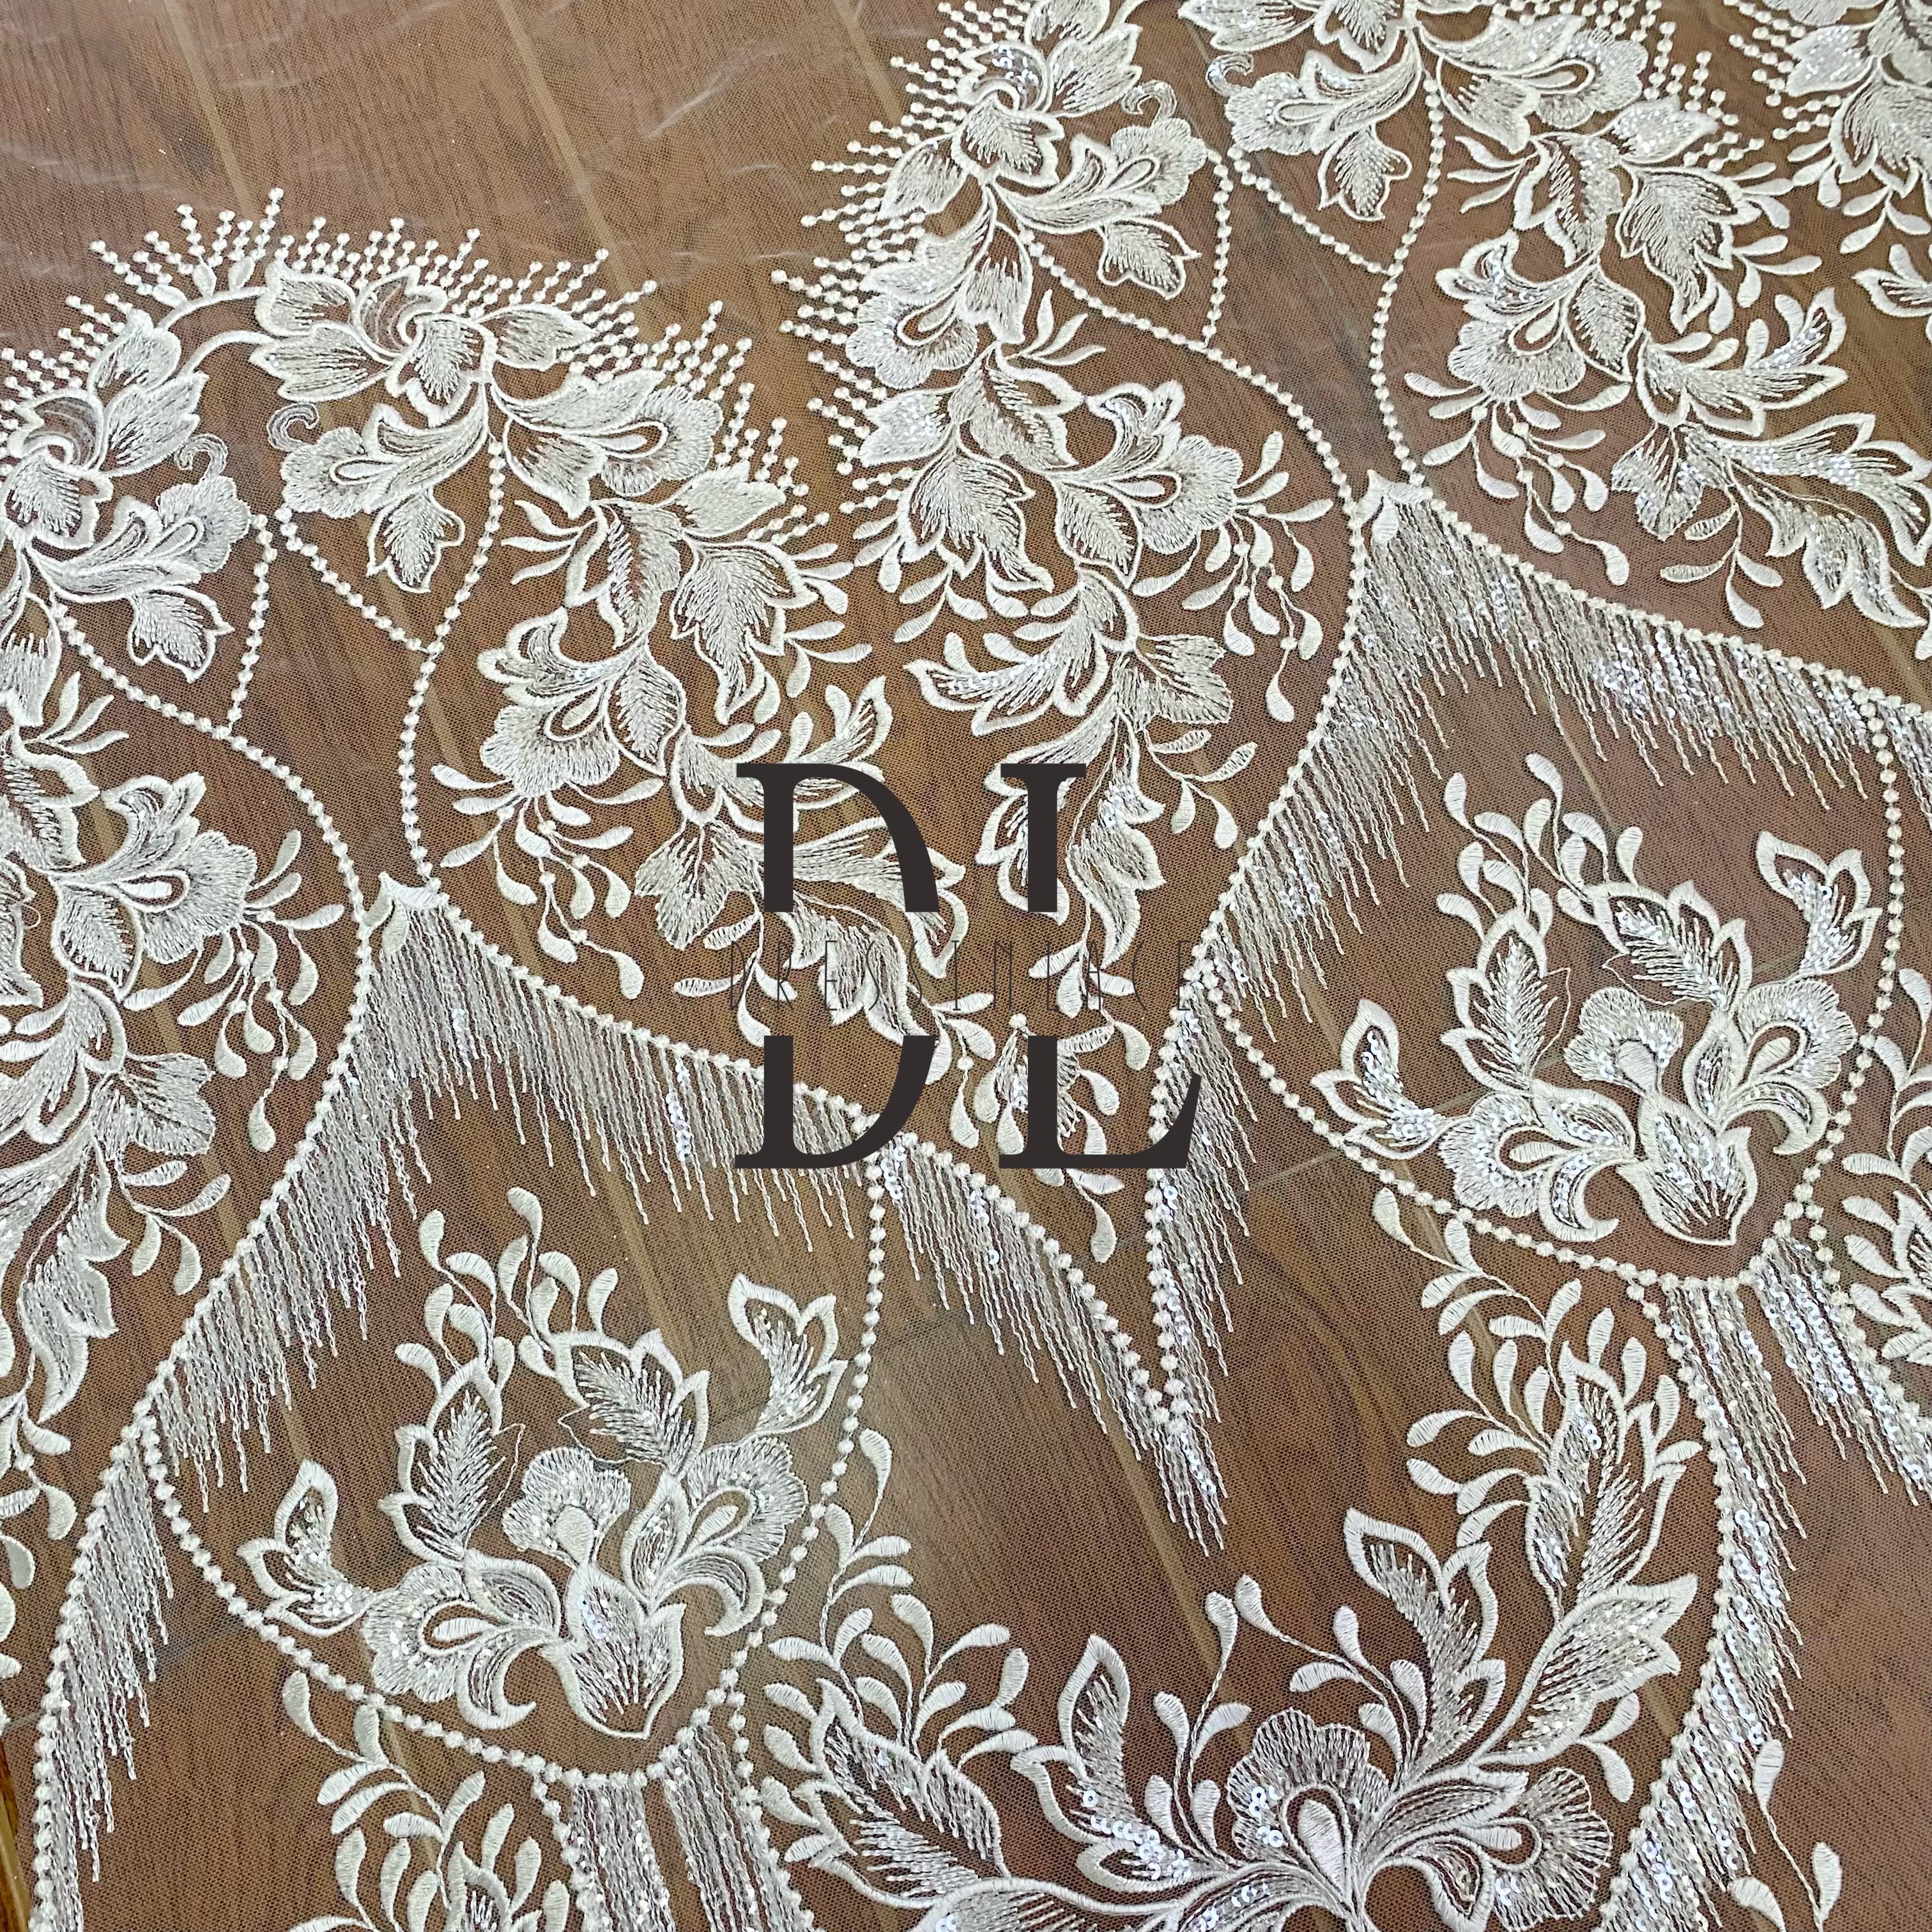 DL130135 Embroidery Lace Fabric for Bridal Wedding Dresses – Shiny Transparent with Soft, Skin-Friendly Mesh DL130135